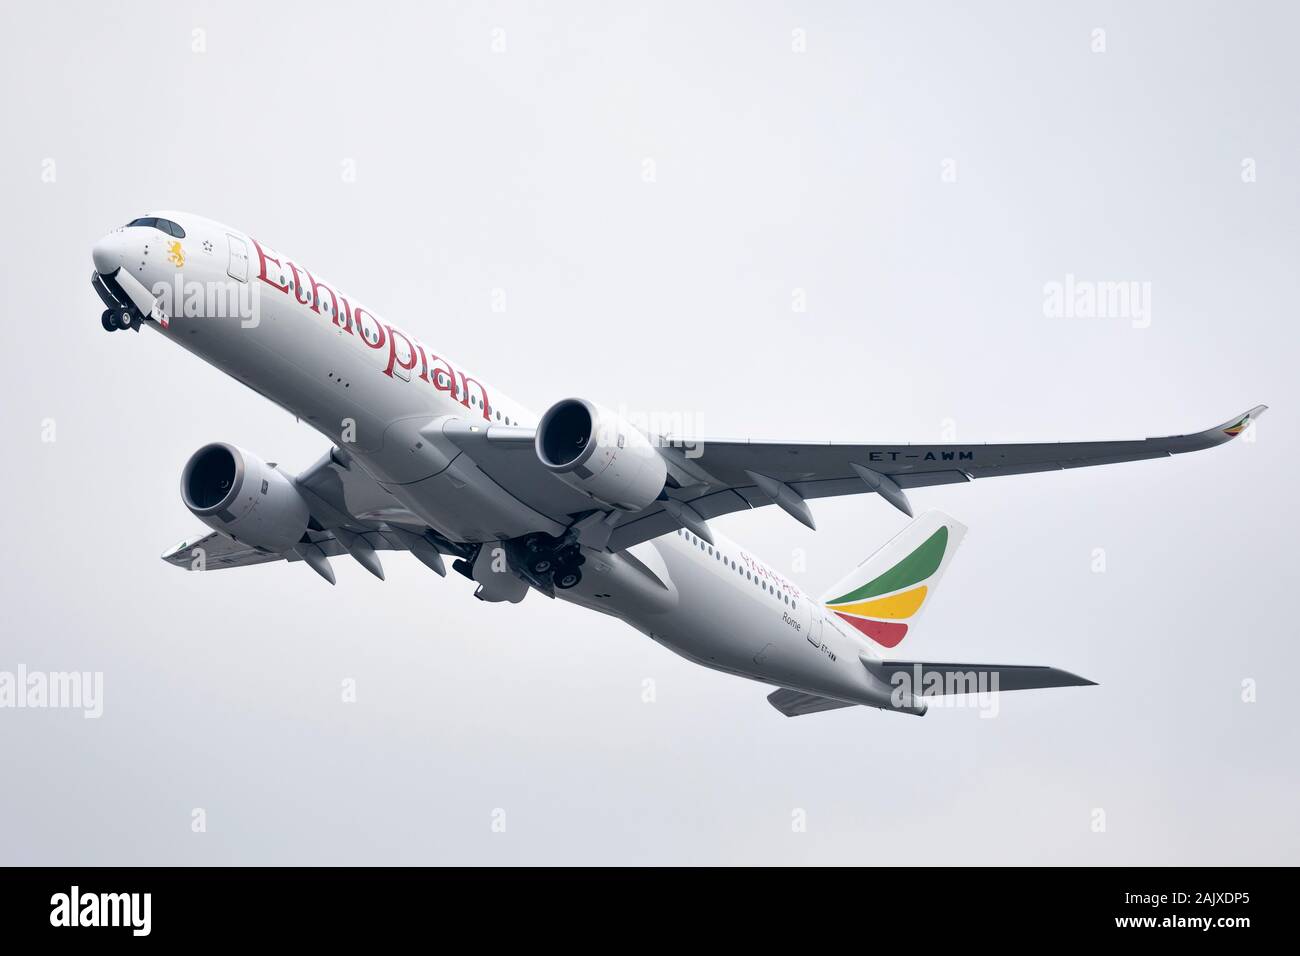 Ethiopian Airlines Airbus A350 registration ET-AWM taking off on December 29th 2019 at Heathrow Airport, Middlesex, UK Stock Photo